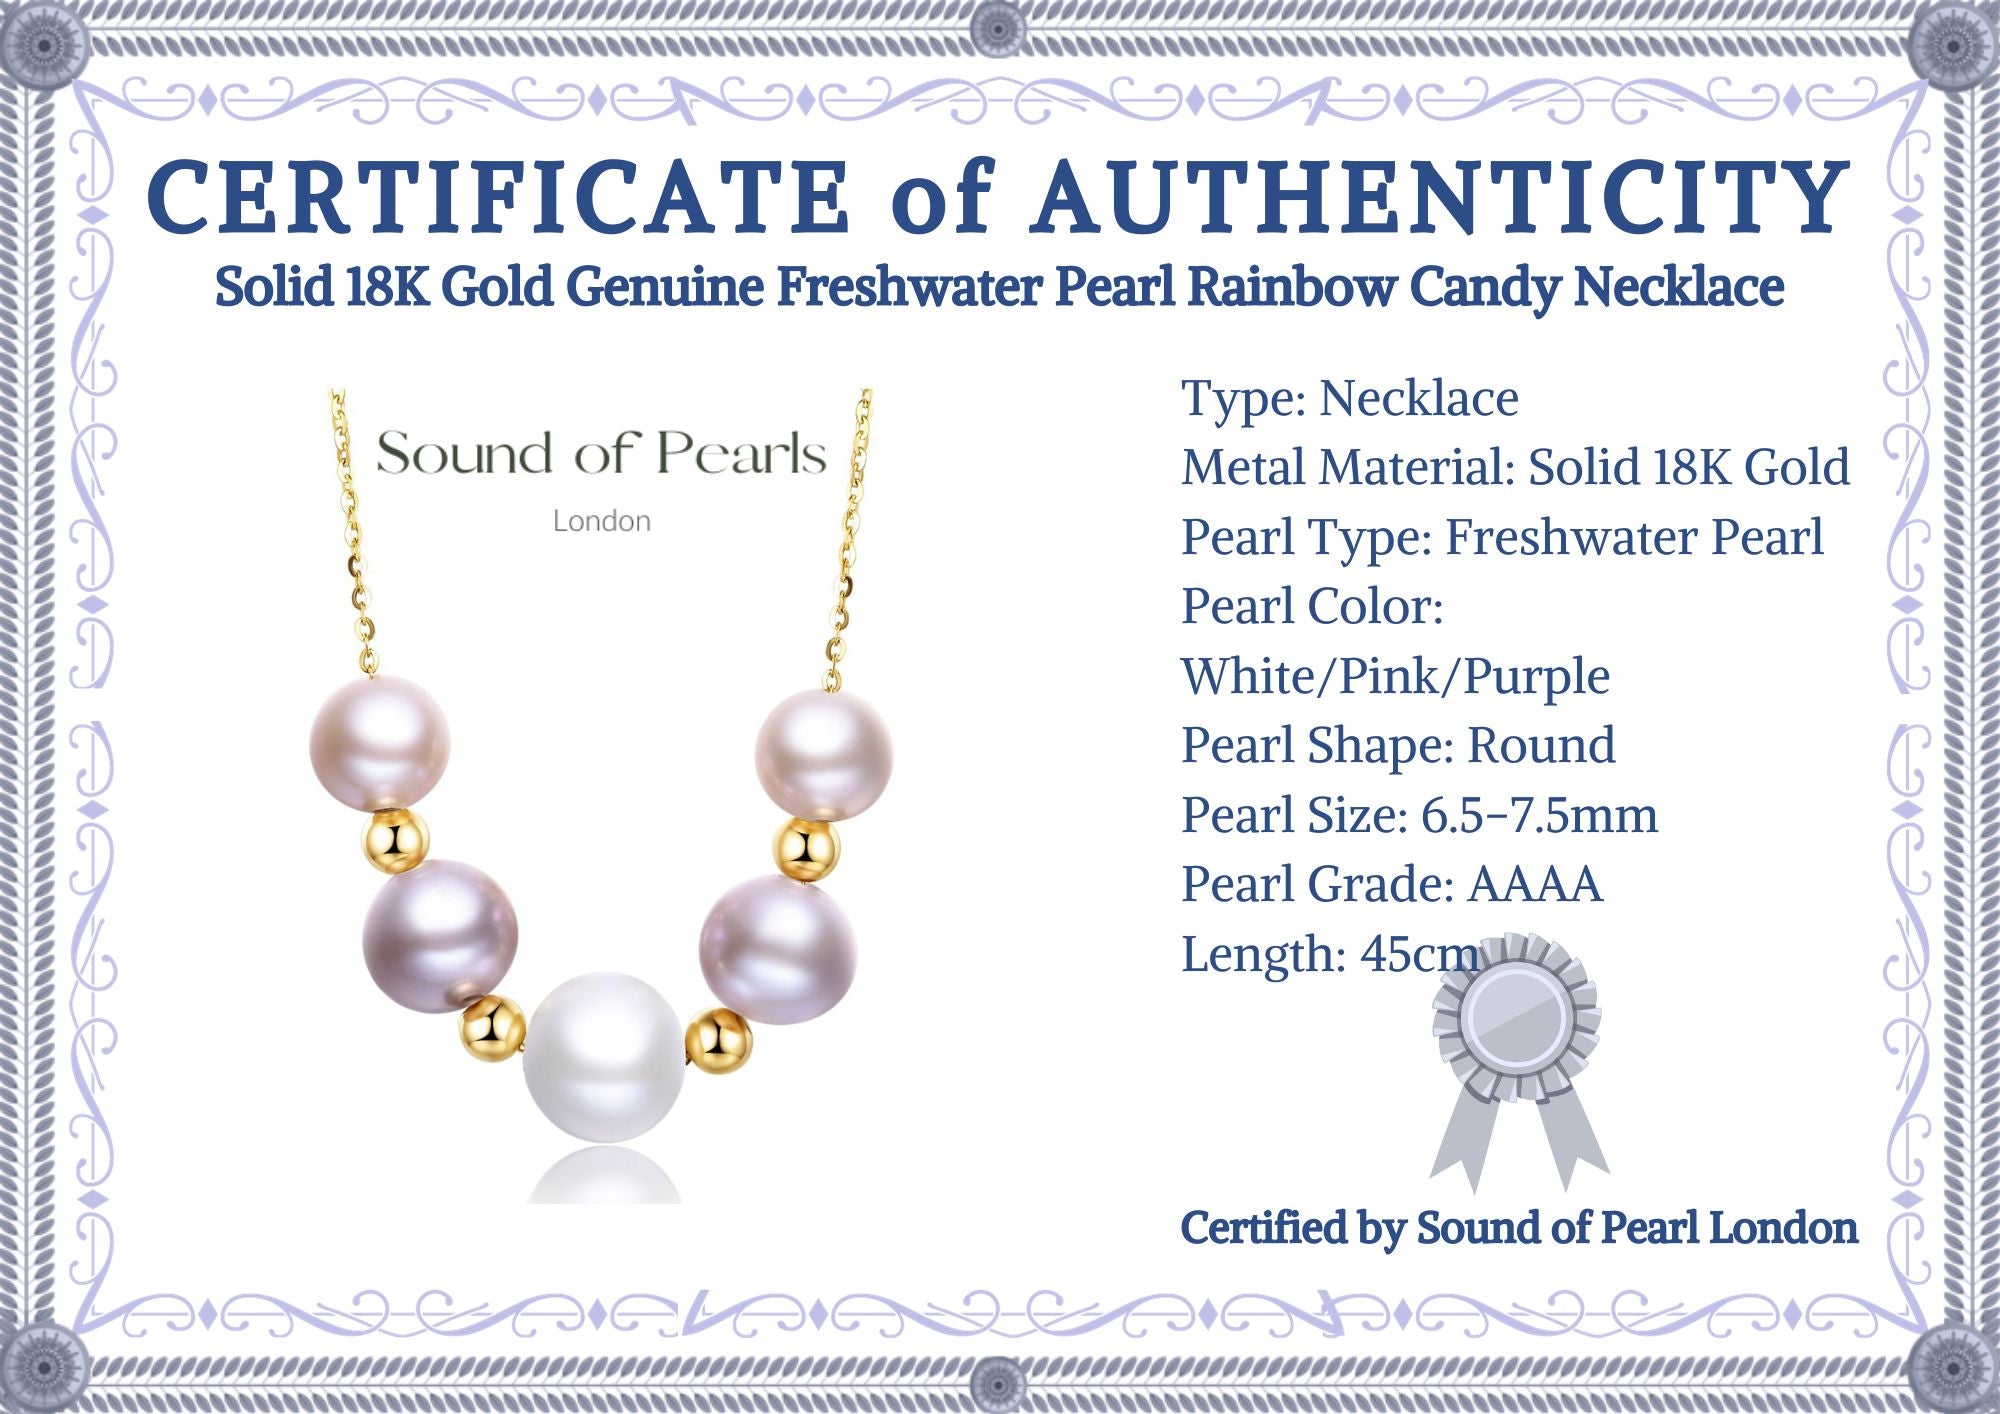 Solid 18K Gold Genuine Freshwater Pearl Rainbow Candy Necklace